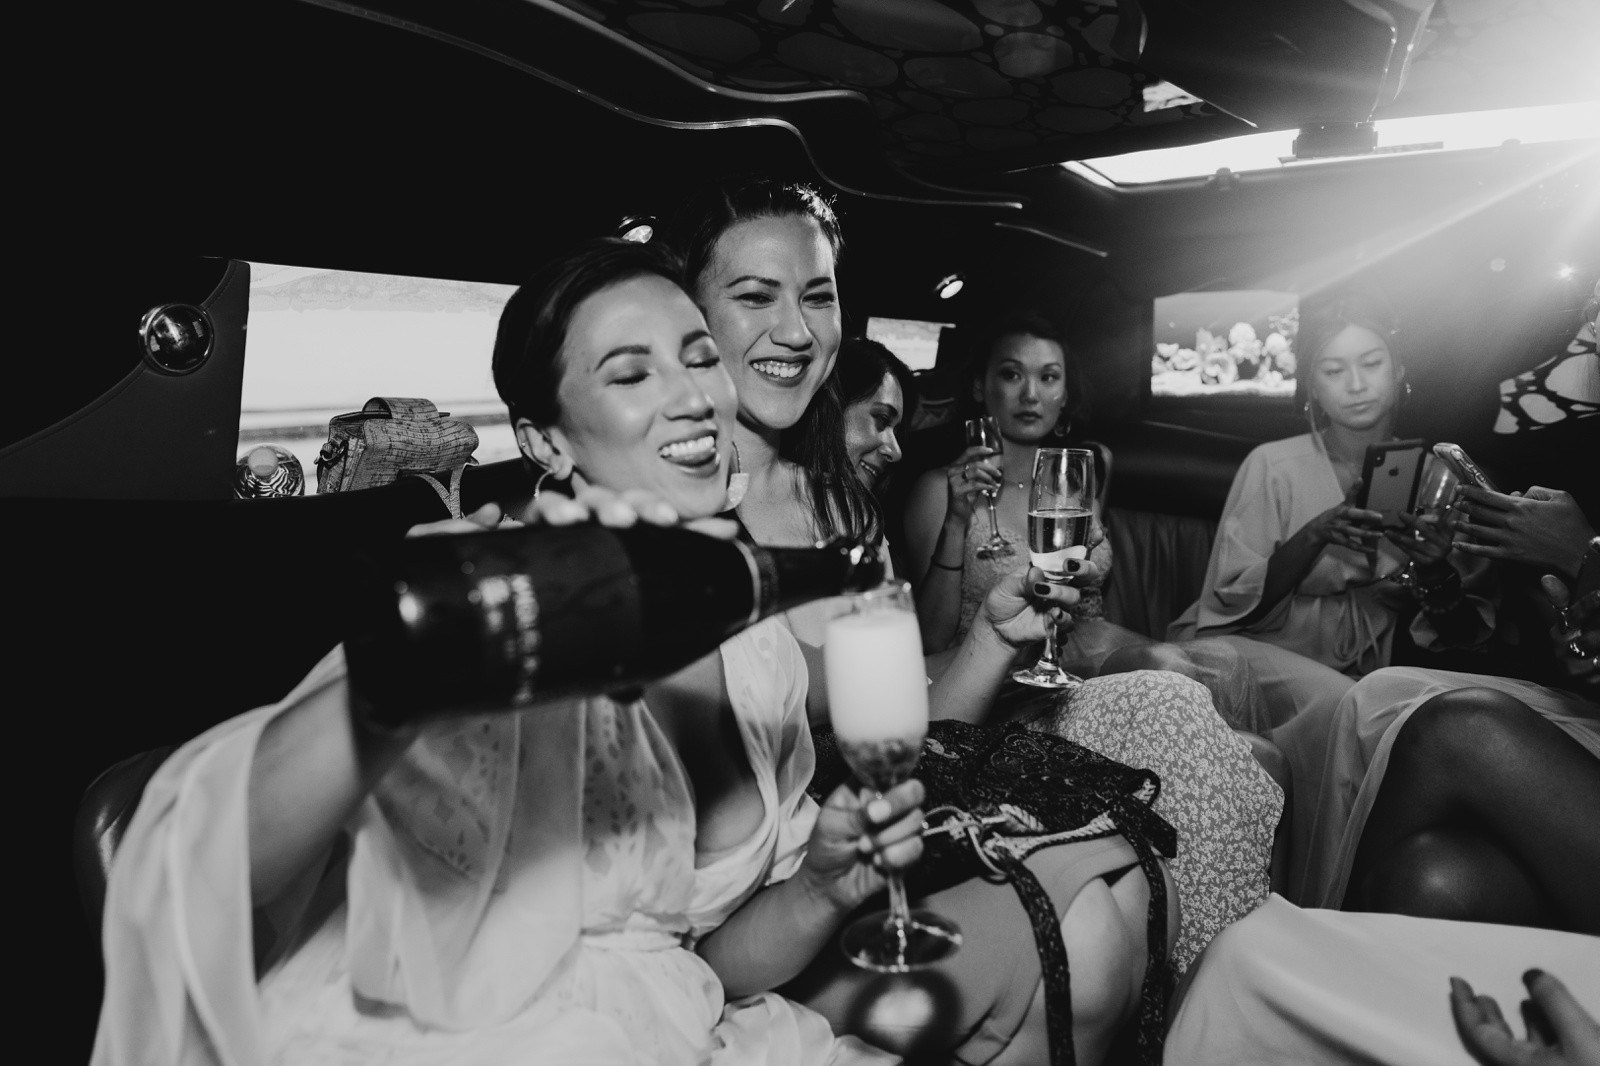 Limo ride with bridesmaids